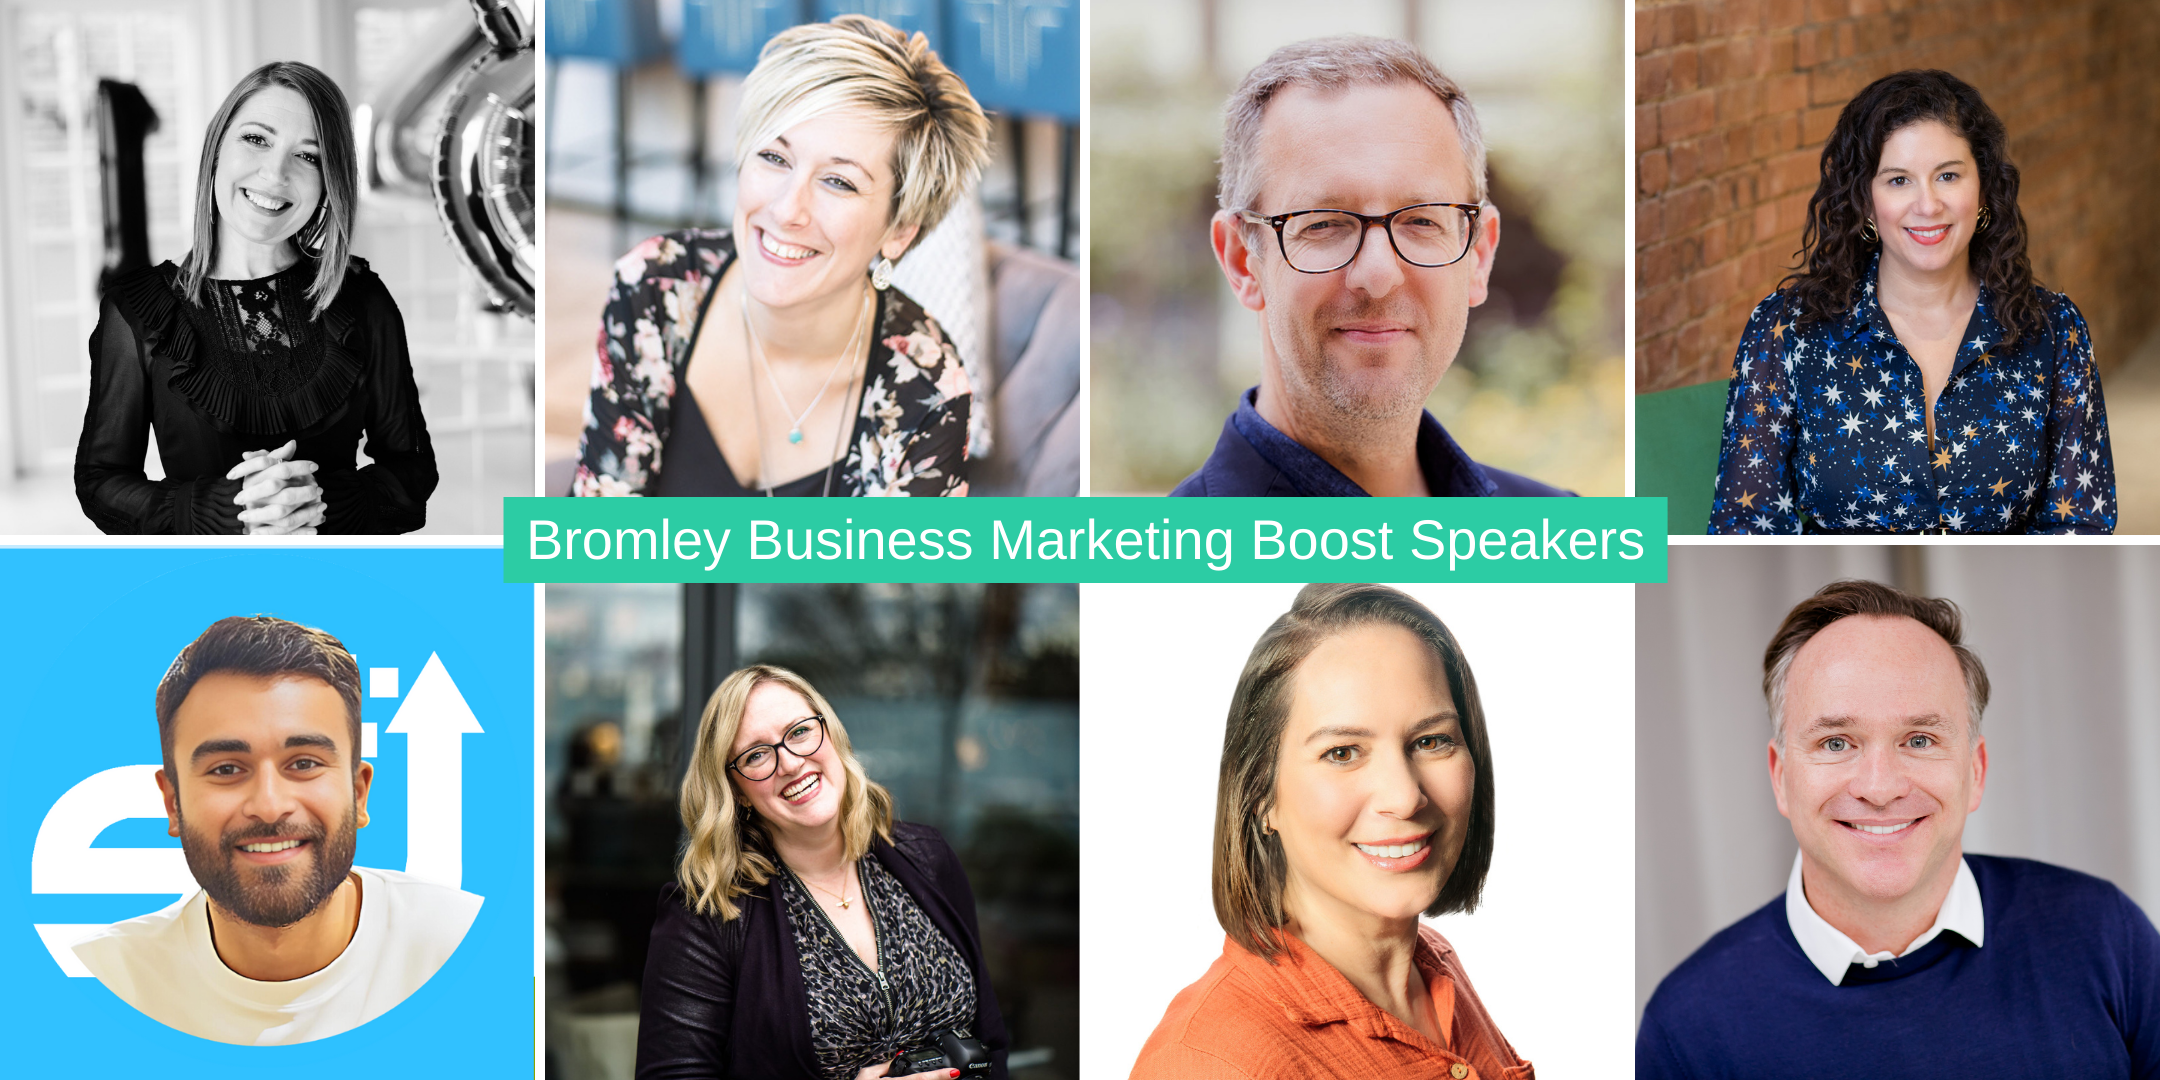 Bromley Business Marketing Boost